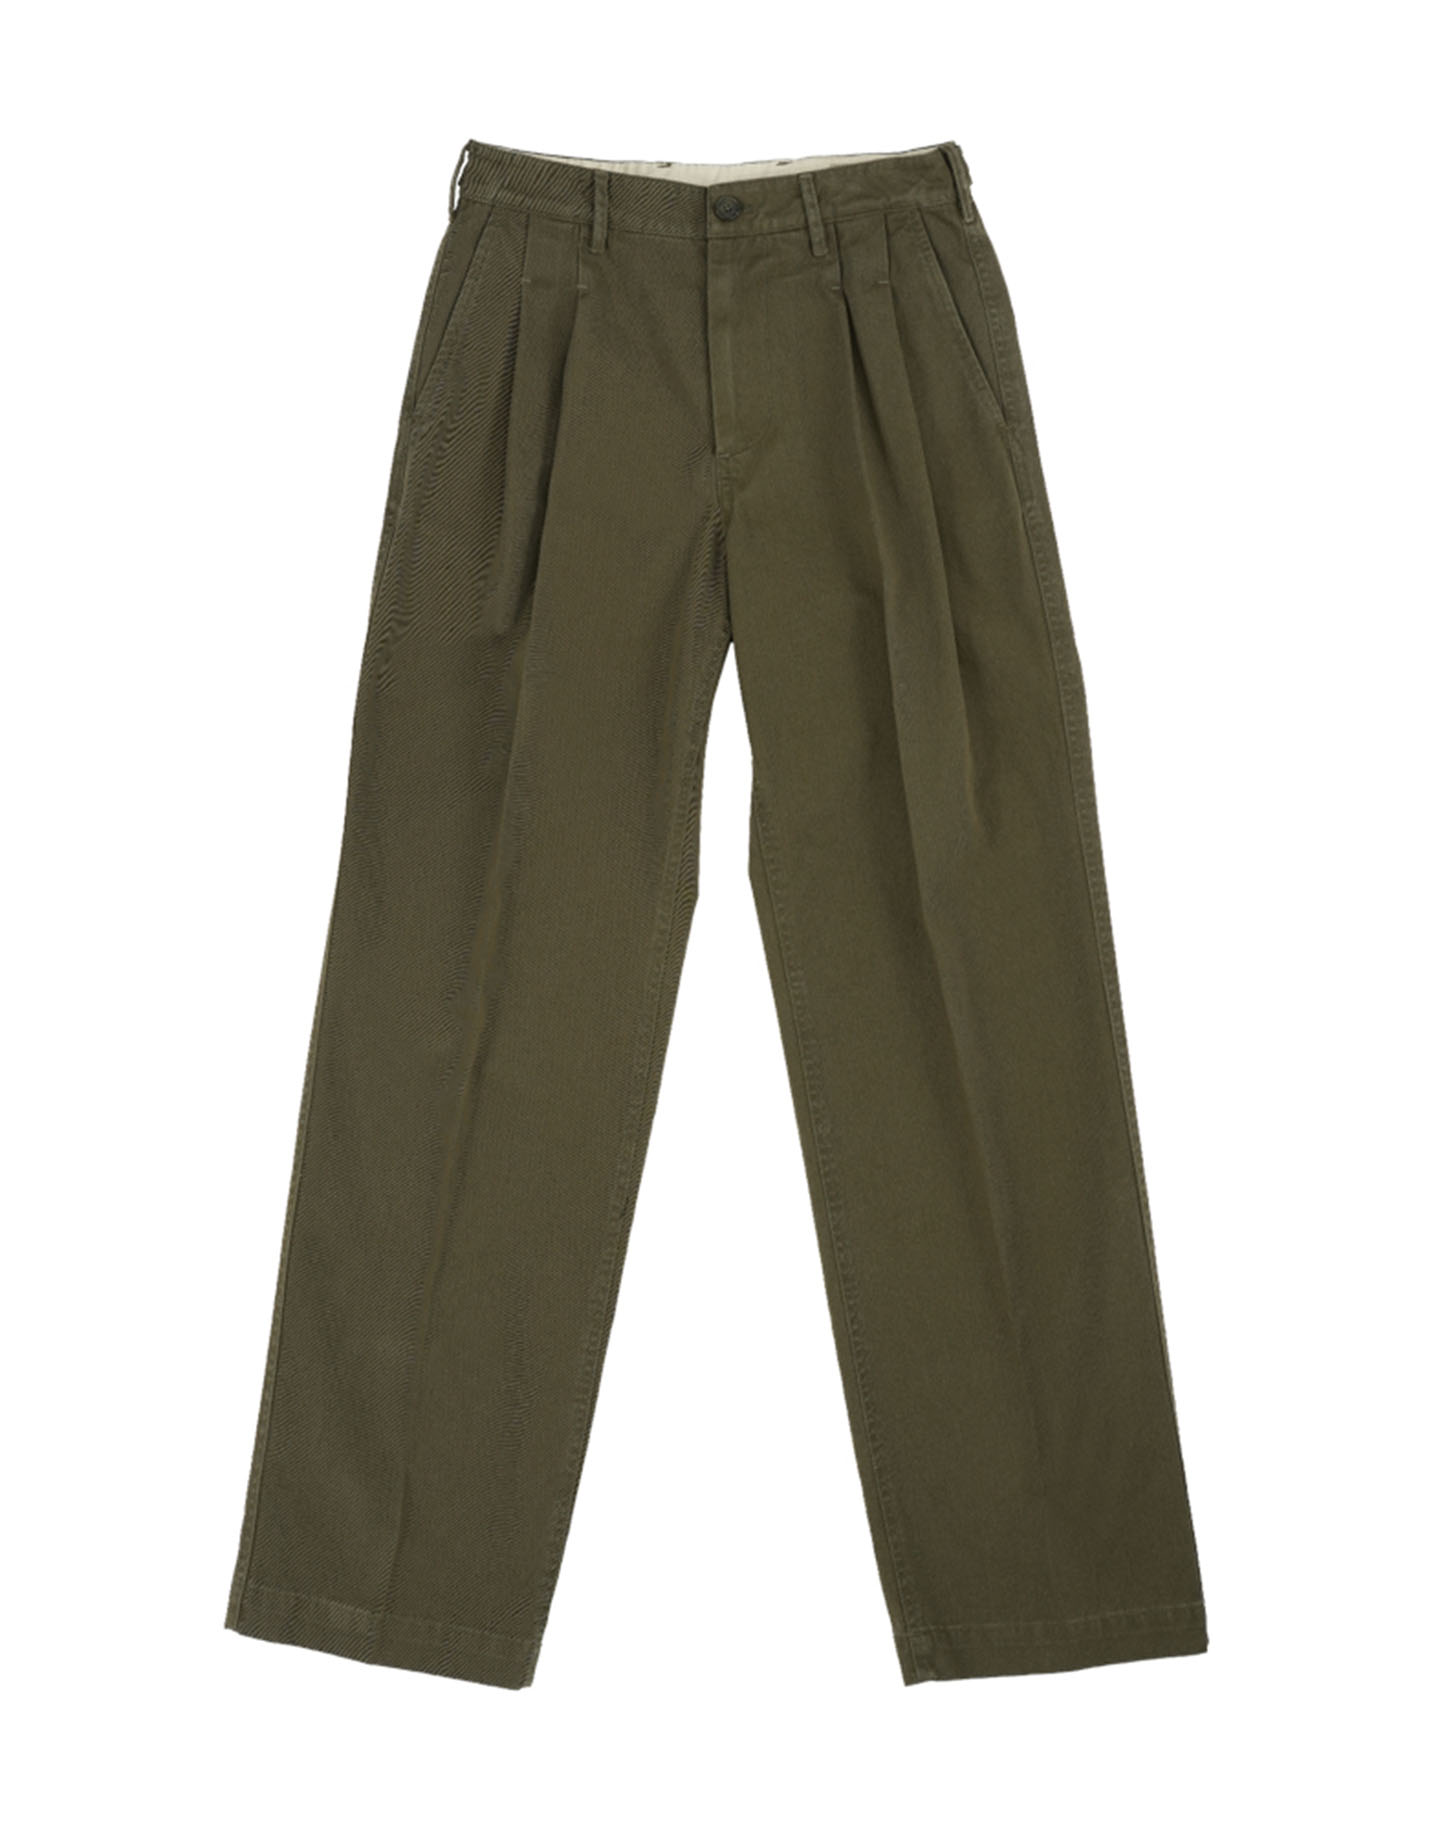 [MIJ] Lavo Cinch back Chino Pants_Wide Straight - Olive